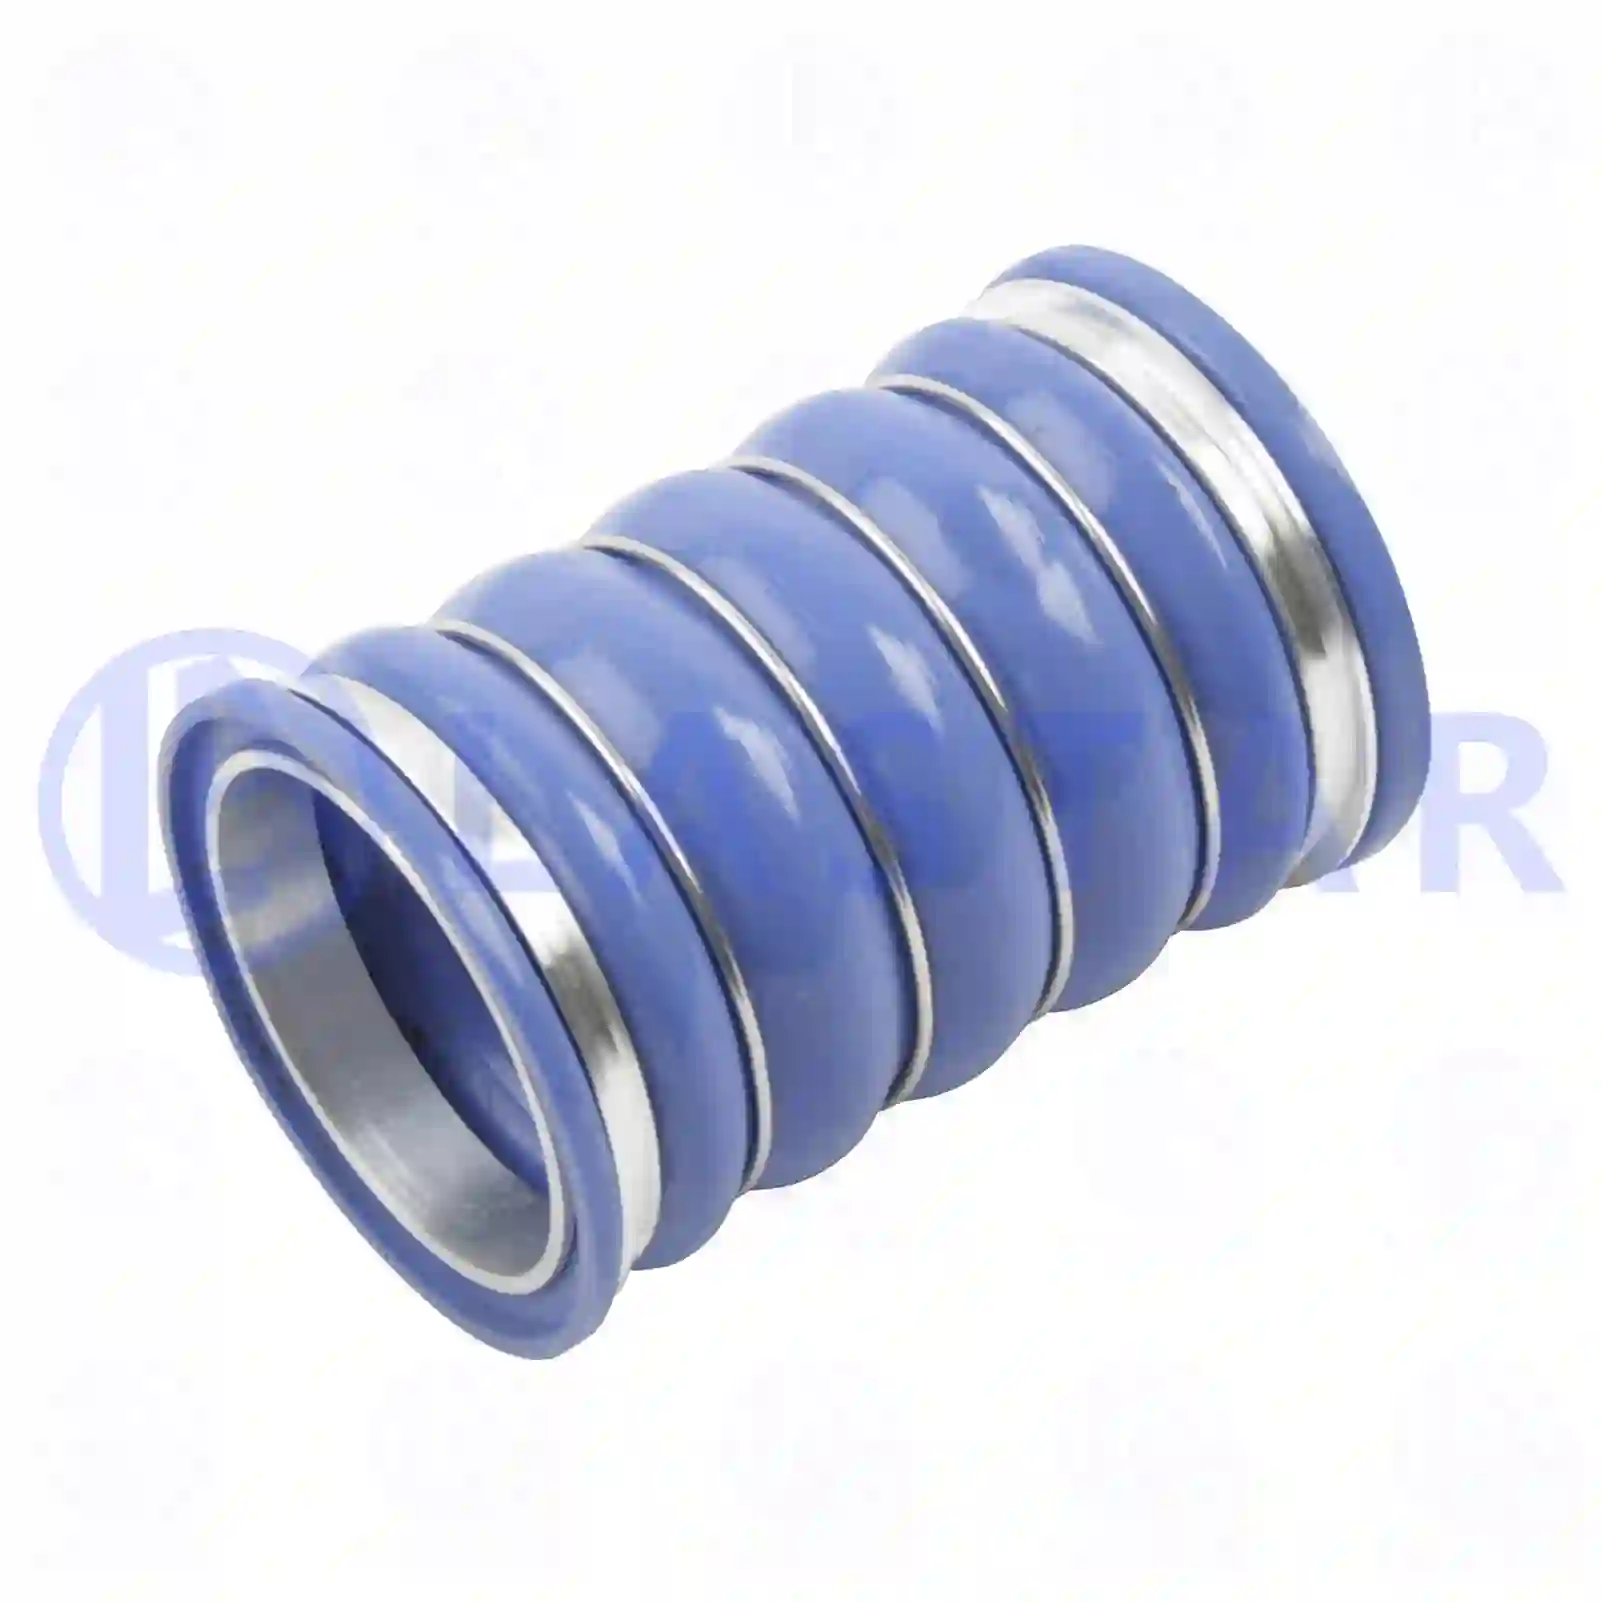 Charge air hose, 77709199, 7421312236, 20561450, 20589122, 21312236, ZG00292-0008 ||  77709199 Lastar Spare Part | Truck Spare Parts, Auotomotive Spare Parts Charge air hose, 77709199, 7421312236, 20561450, 20589122, 21312236, ZG00292-0008 ||  77709199 Lastar Spare Part | Truck Spare Parts, Auotomotive Spare Parts